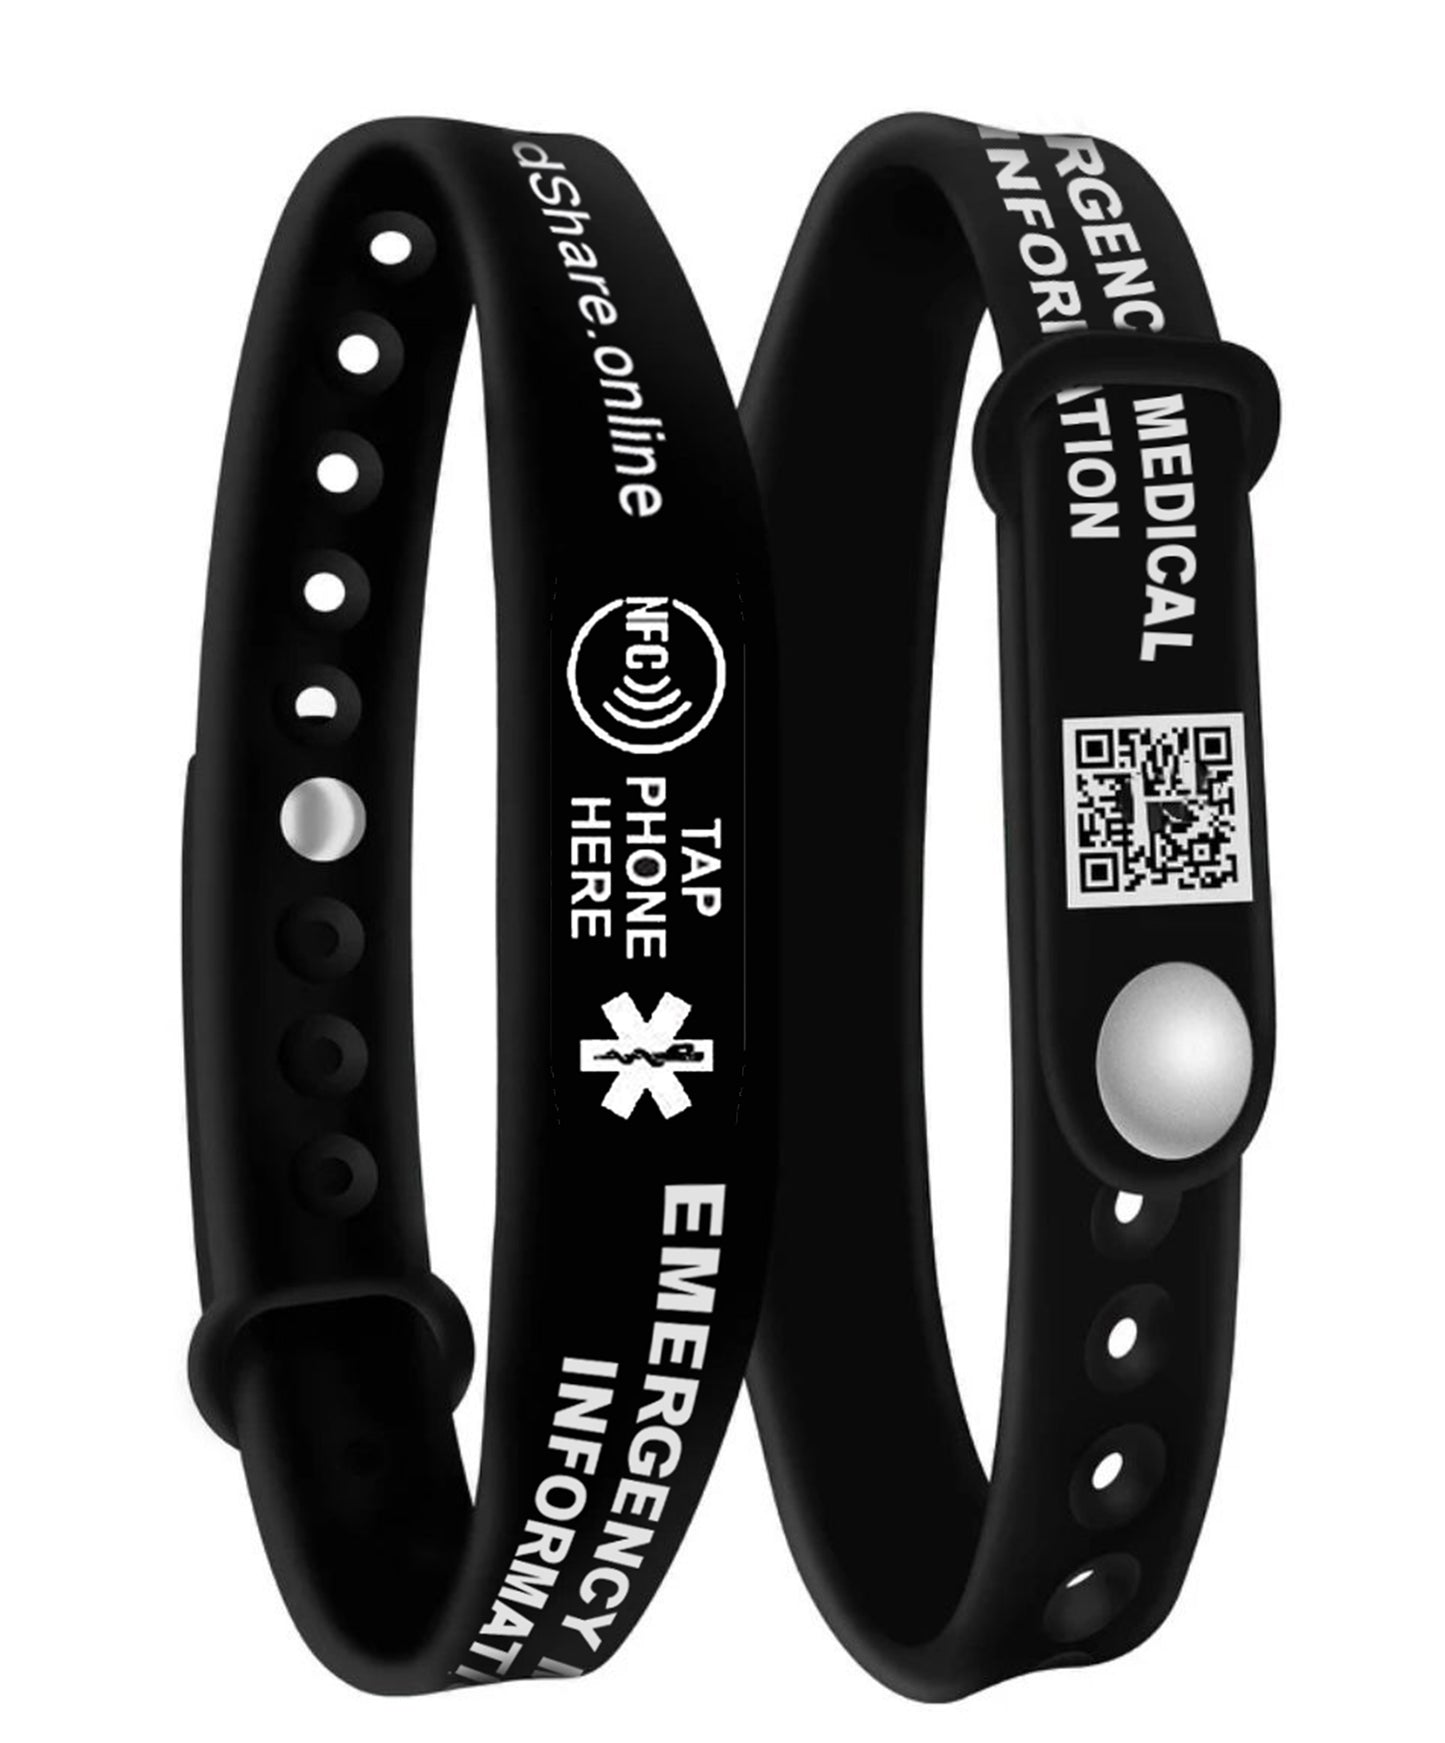 Smart NFC Emergency Medical Information Wristband ID With Passive Tracking